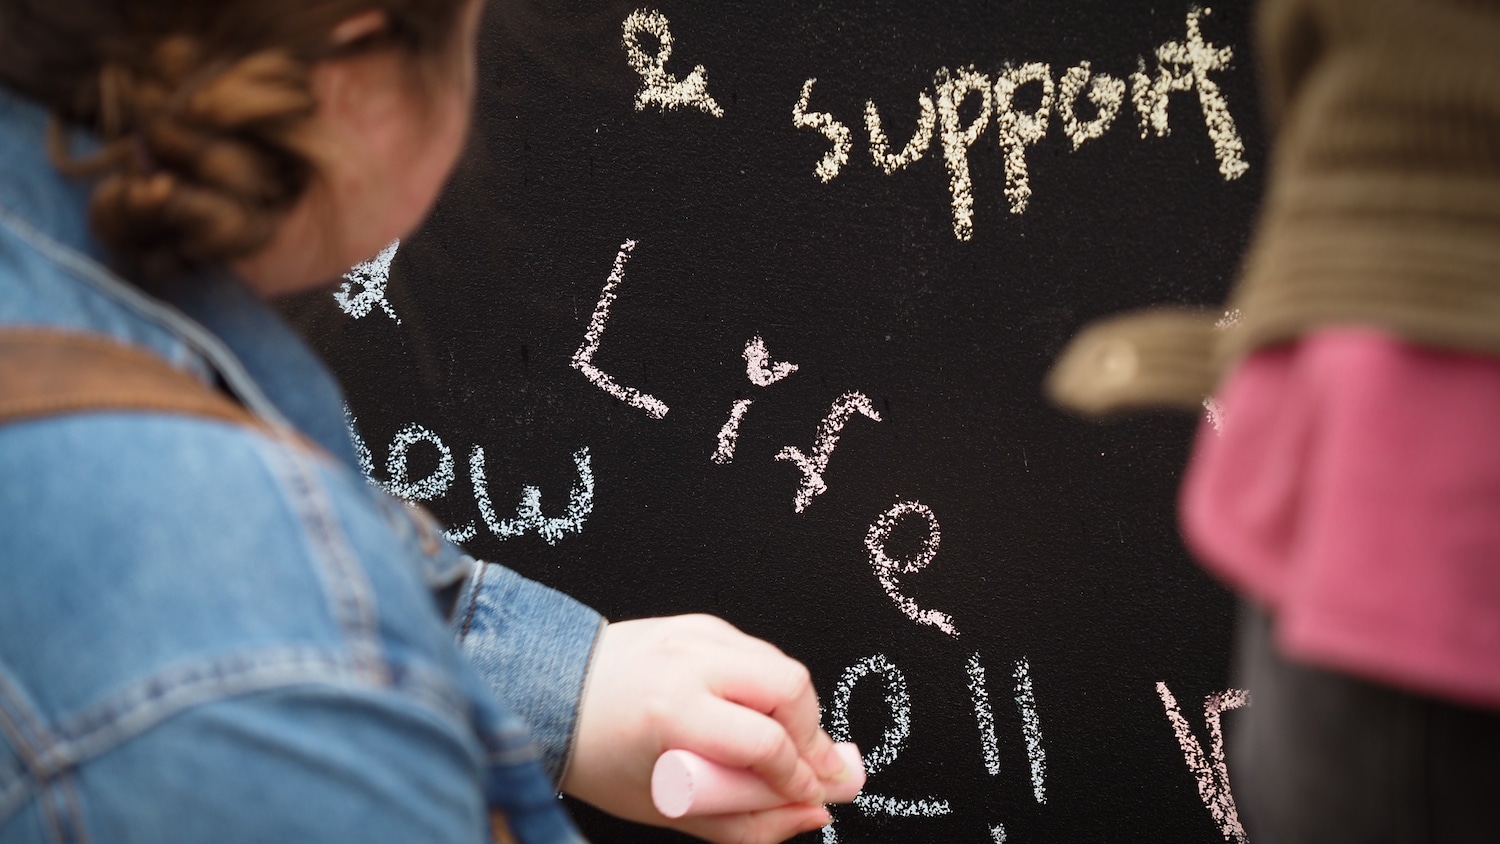 Students write "life" on a chalk wall during an annual Day of Giving event.